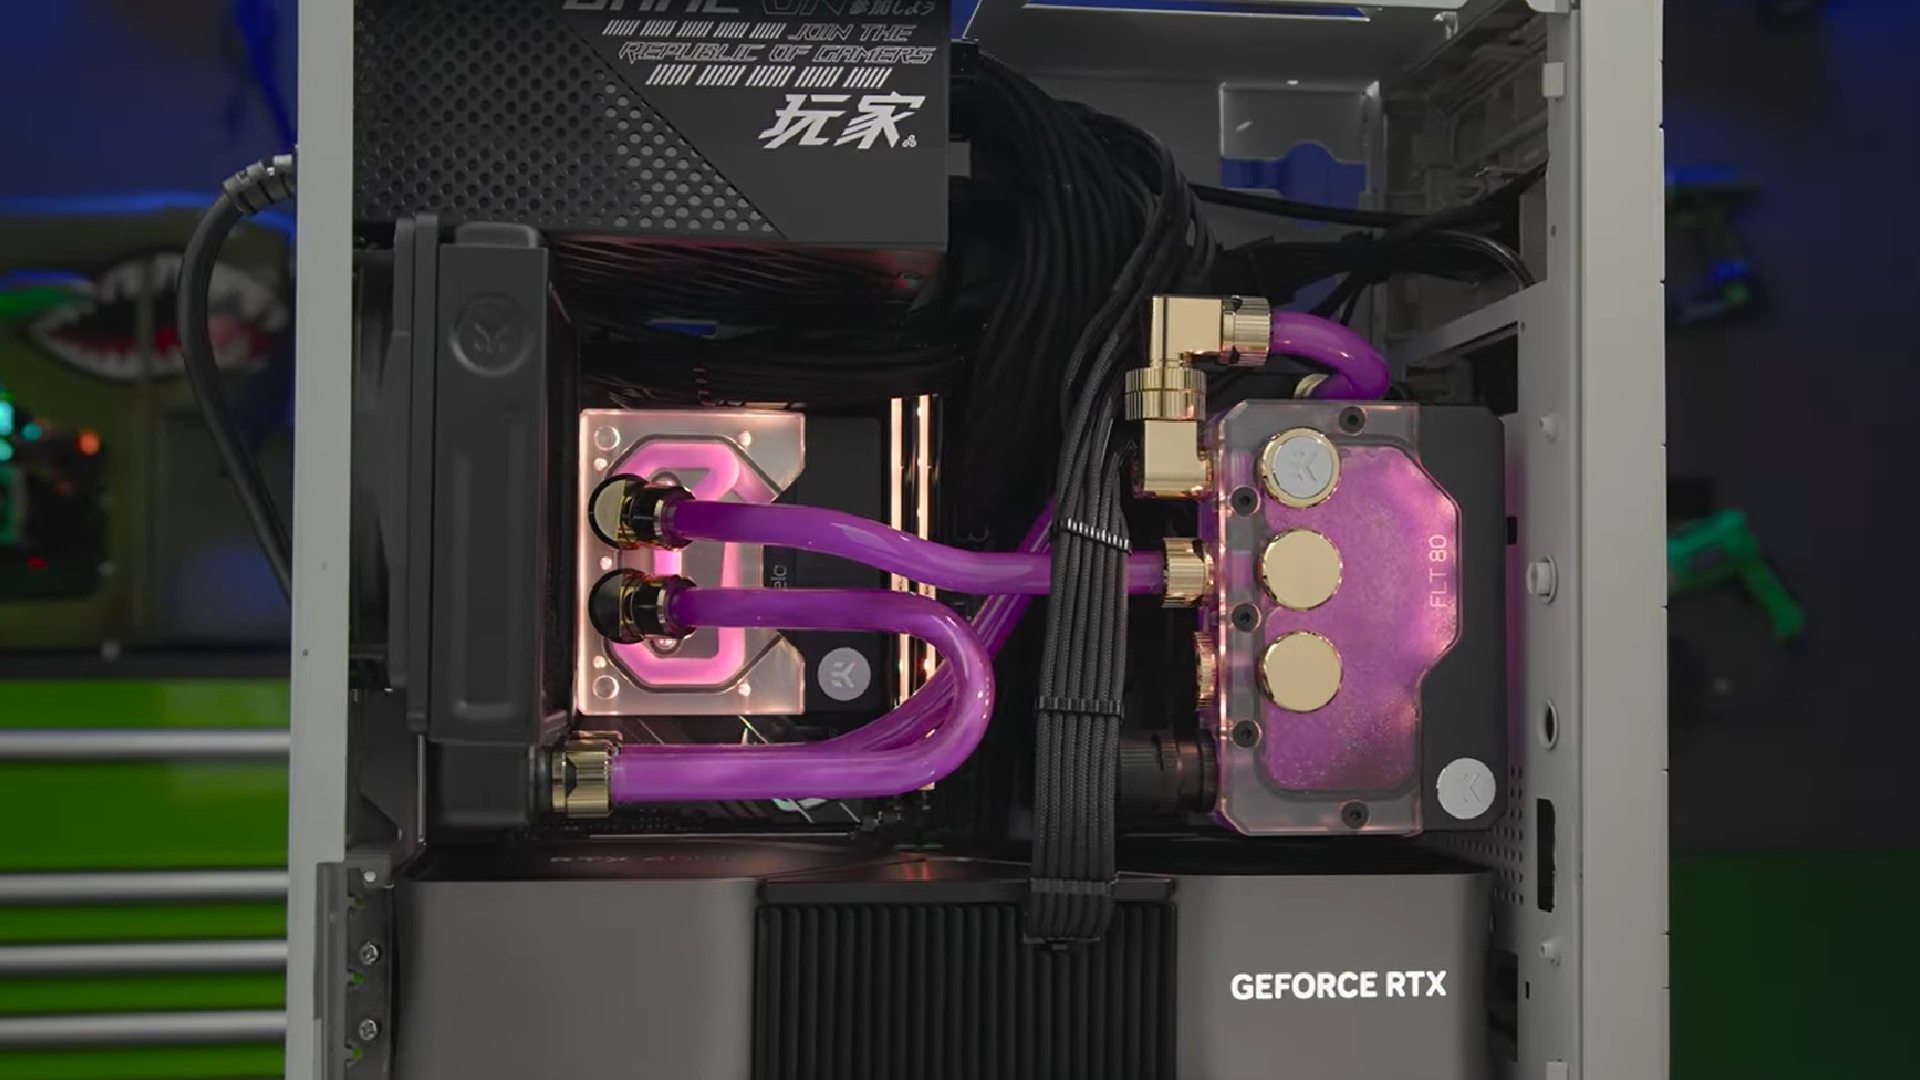 Inside Nvidia GeForce Garage sleeper RTX 4090 gaming PC with purple AIO cooler and graphics card on bottom